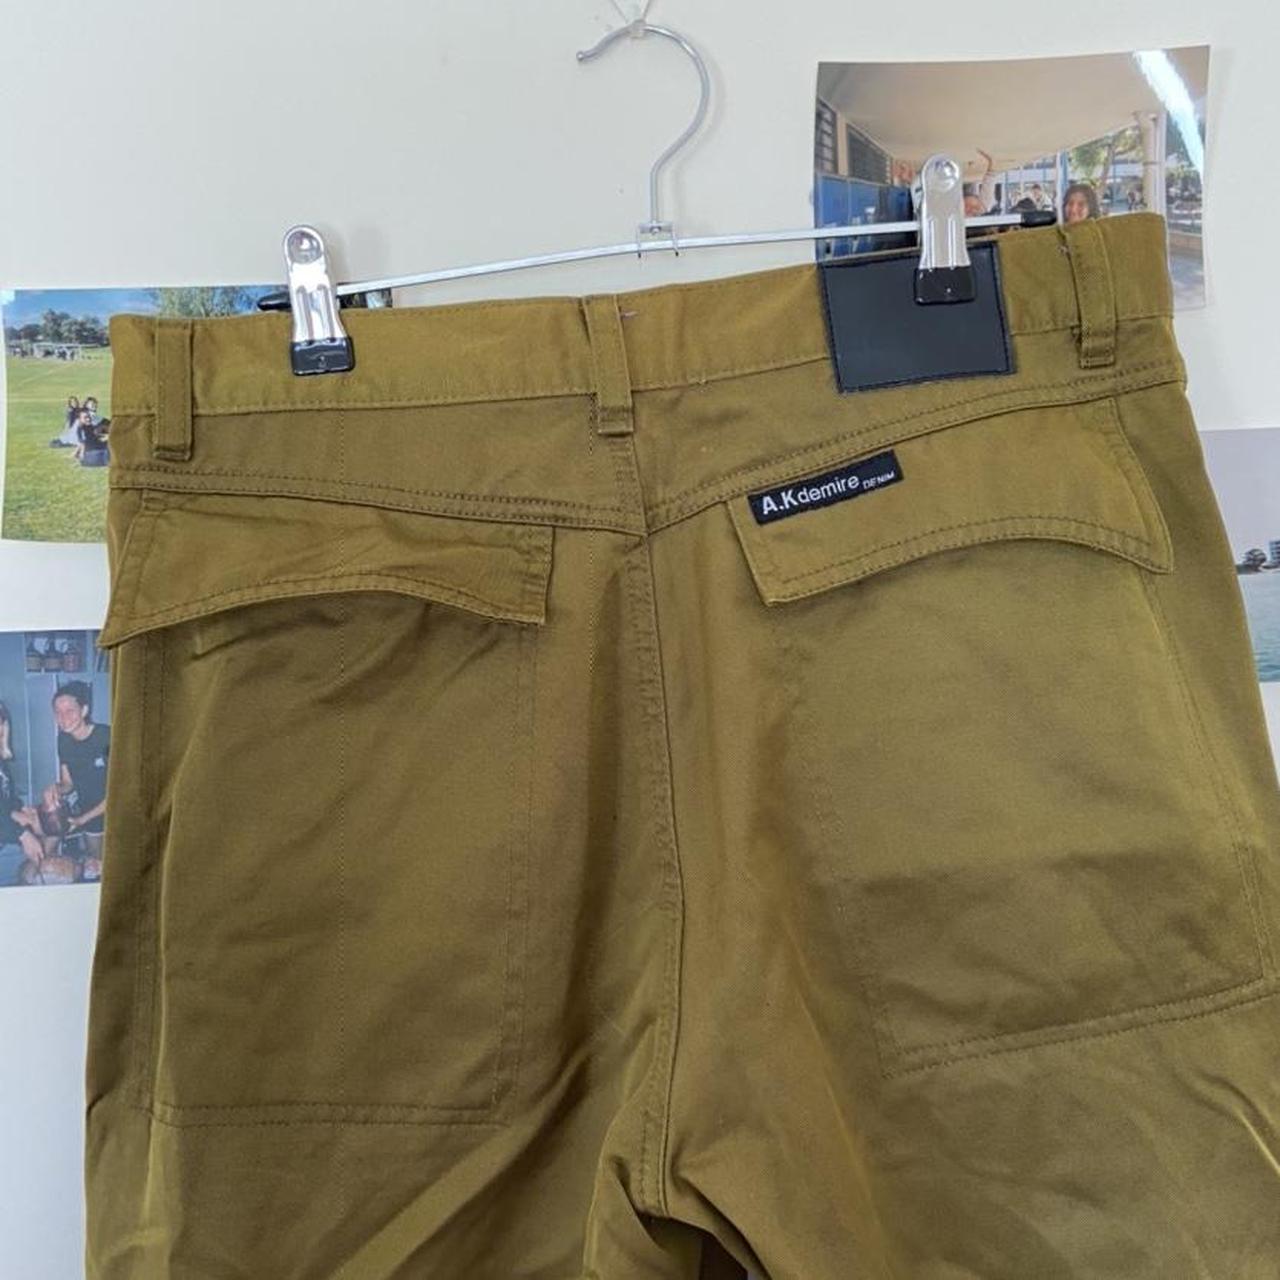 A.K Demire cargo pants! Iridescent olive/army green,... - Depop